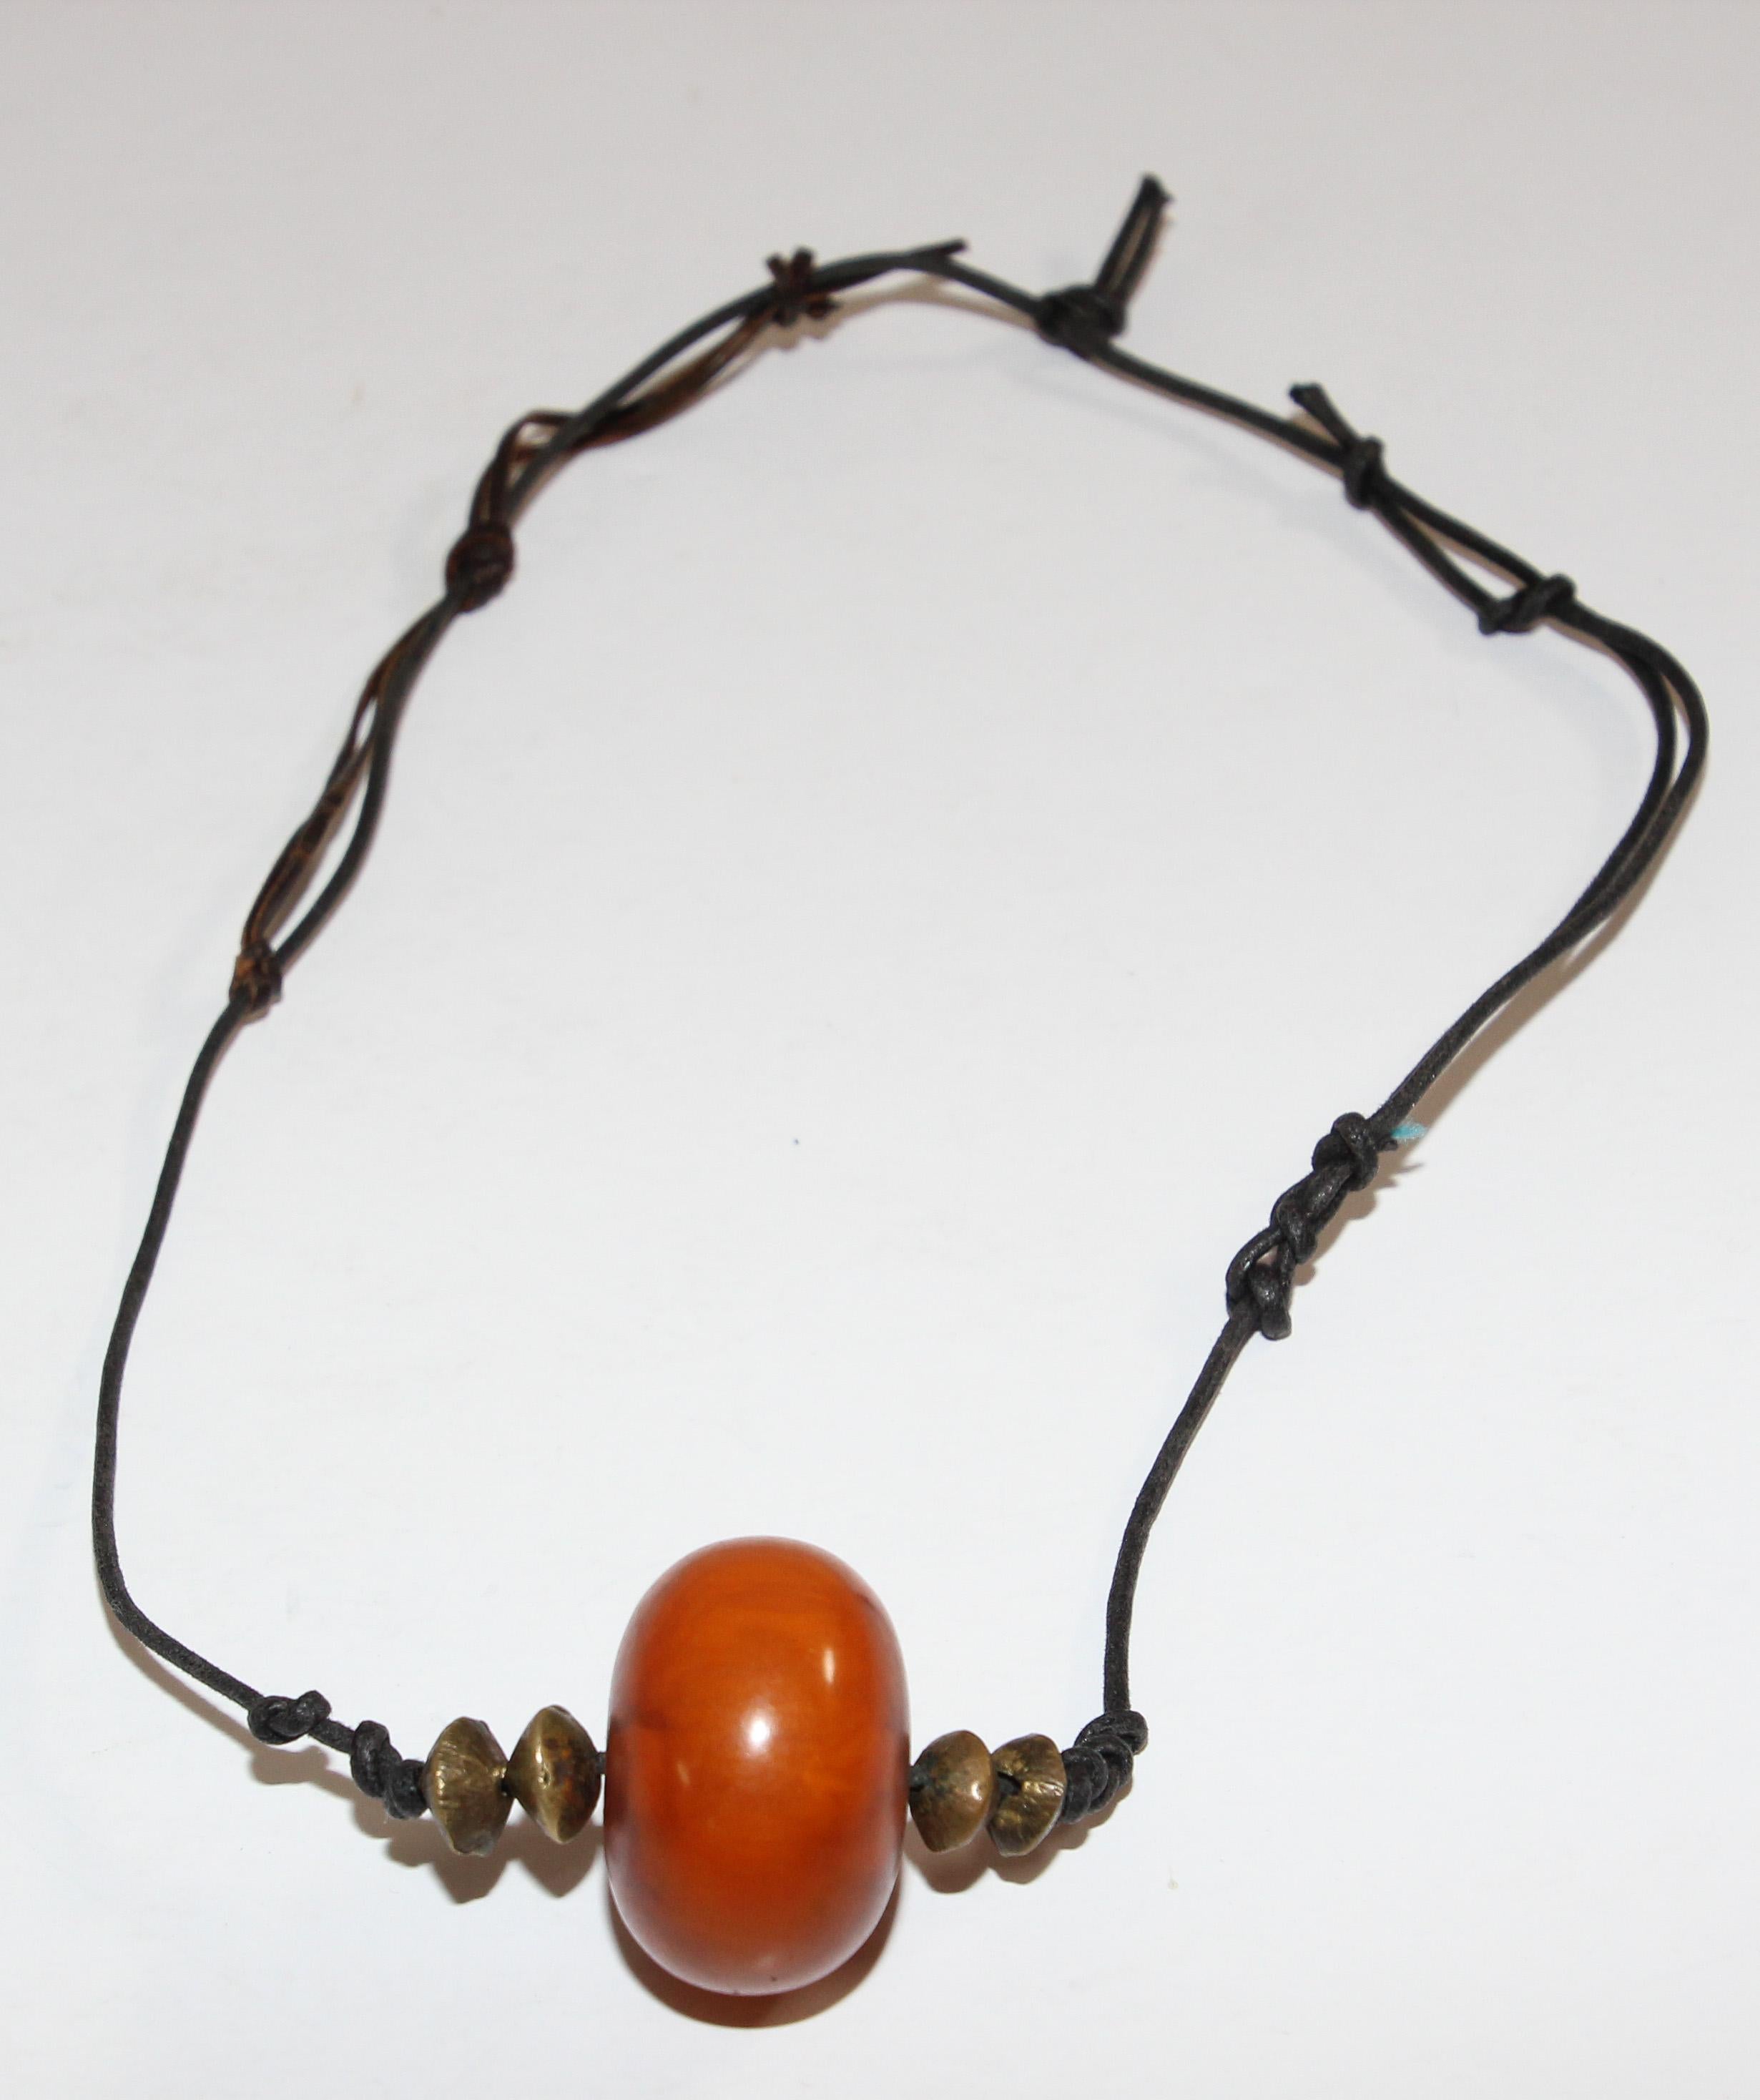 Necklace Amber Beaded Berber Handcrafted Jewelry Handmade Moroccan Large Pendant 